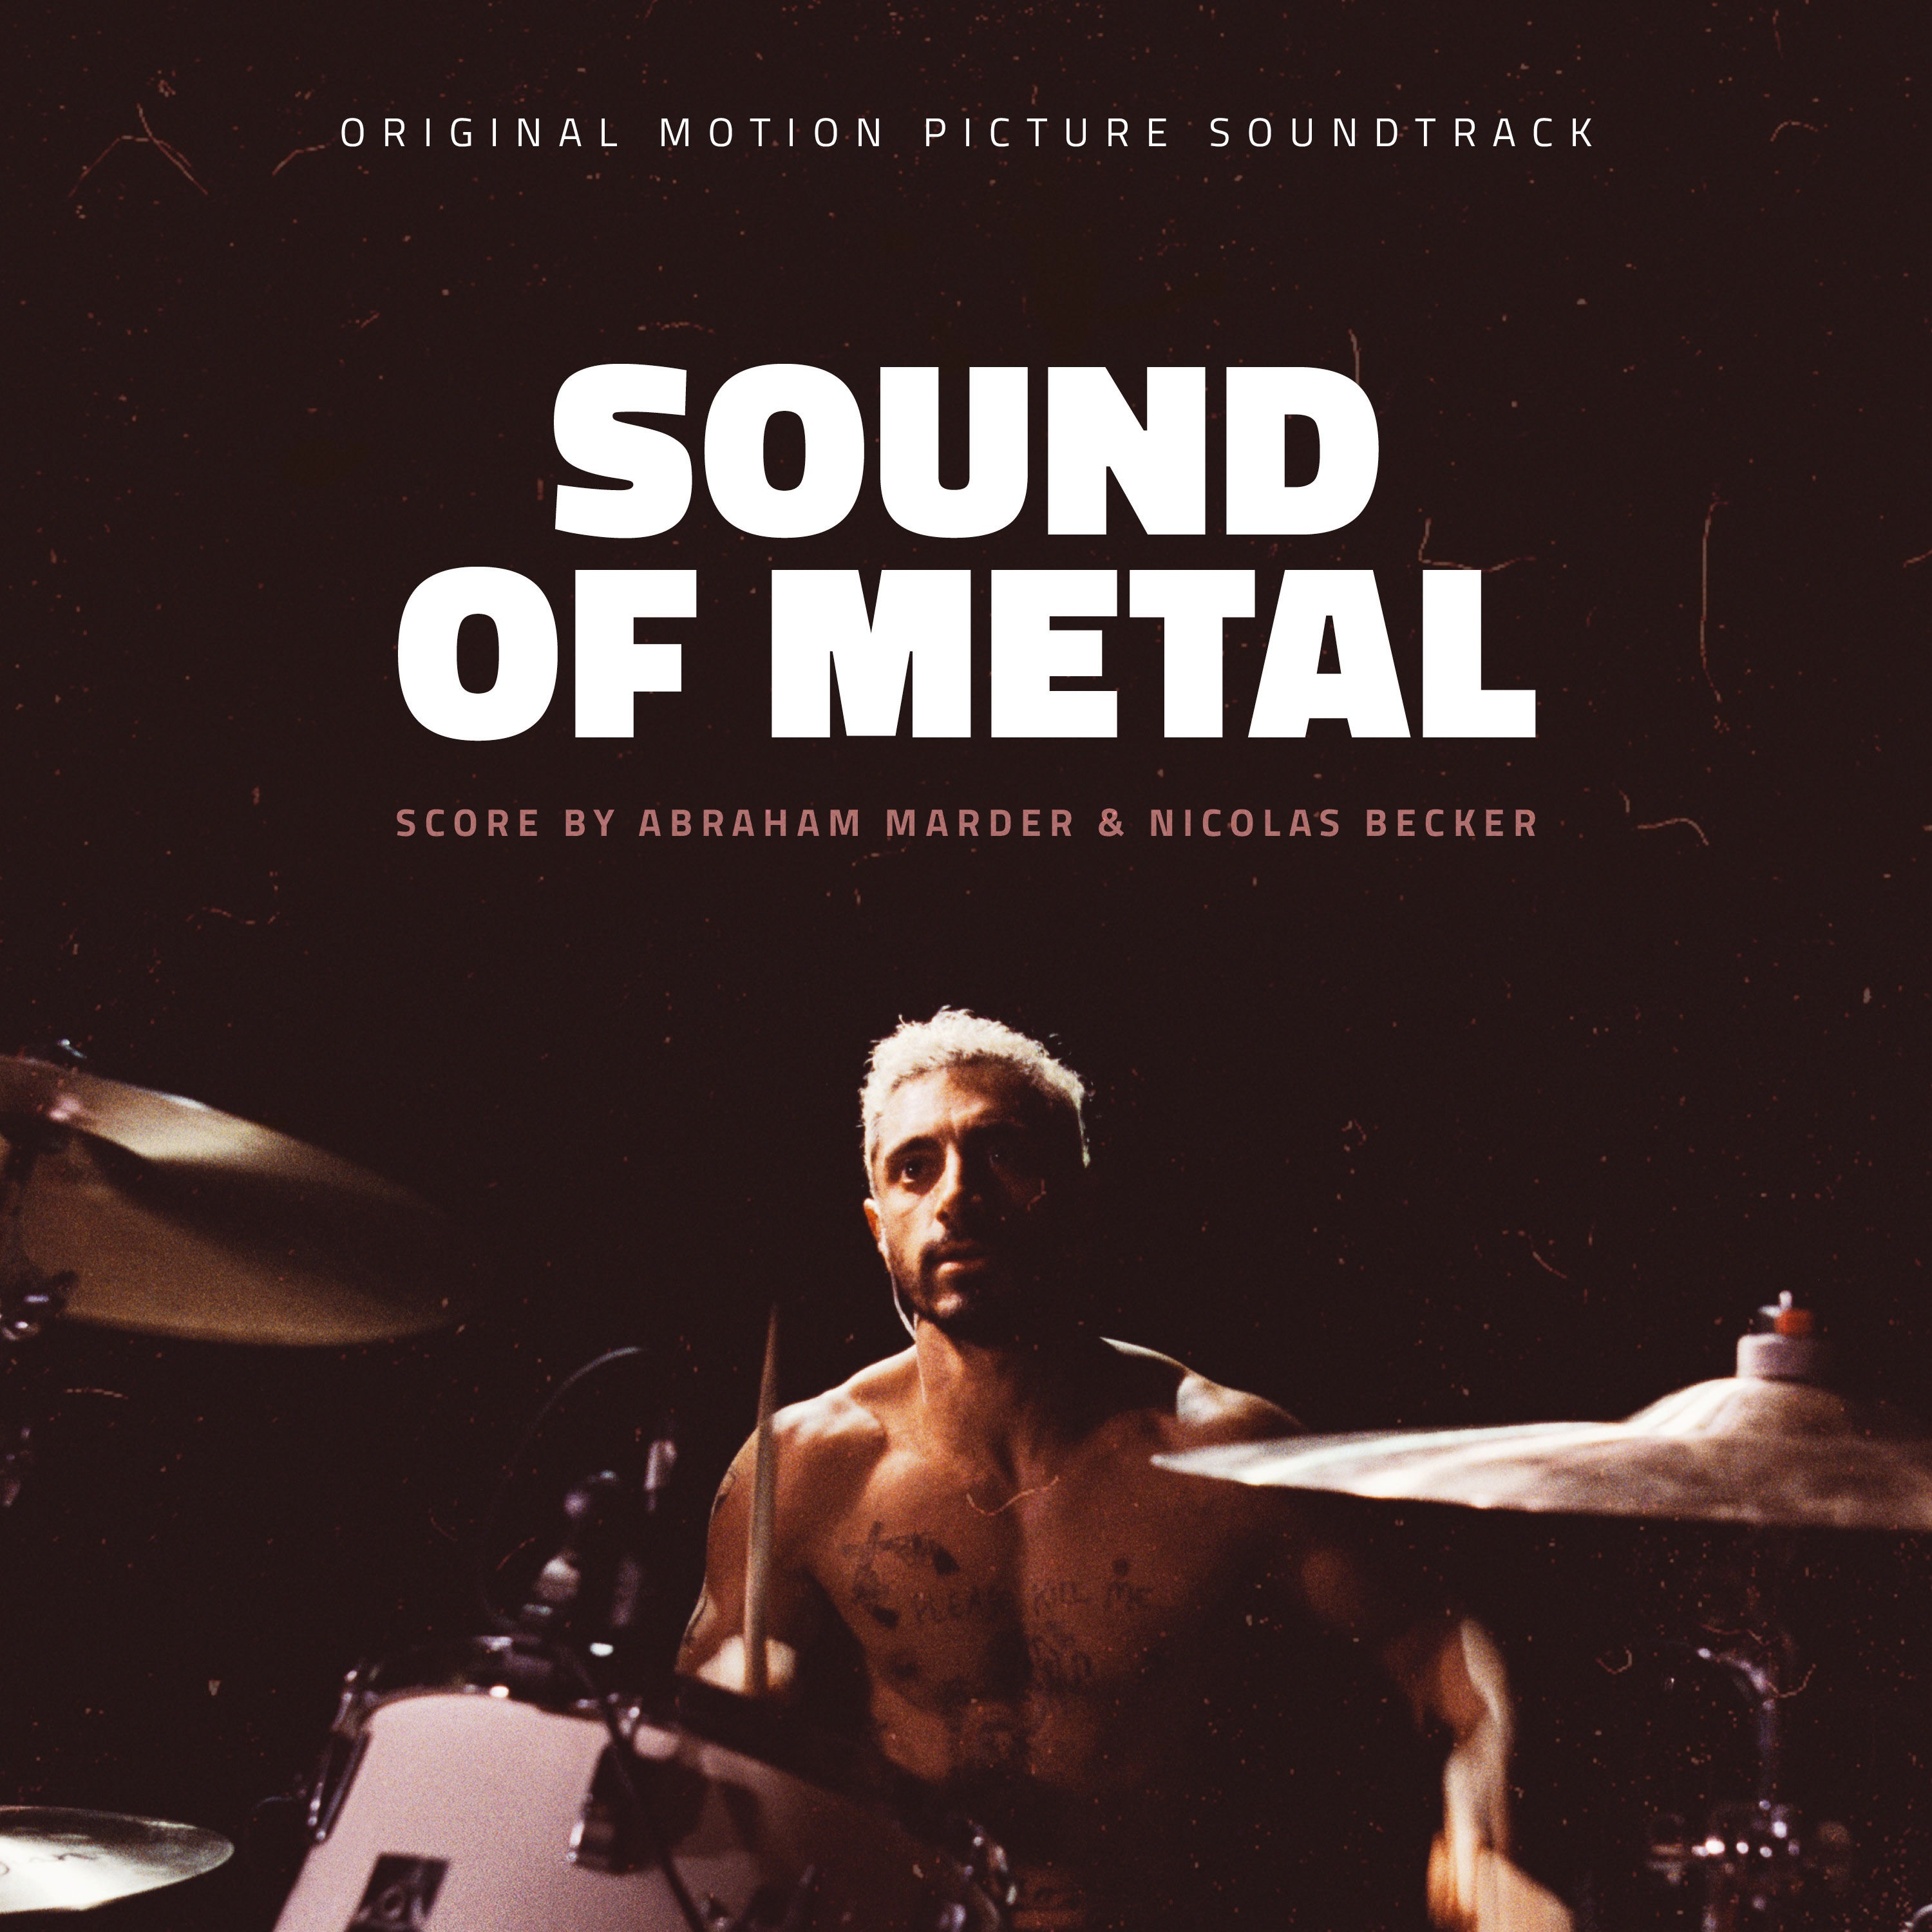 Abraham Marder & Nicolas Becker – Sound of Metal (Music from the Motion Picture) (2021) [FLAC 24bit/48kHz]